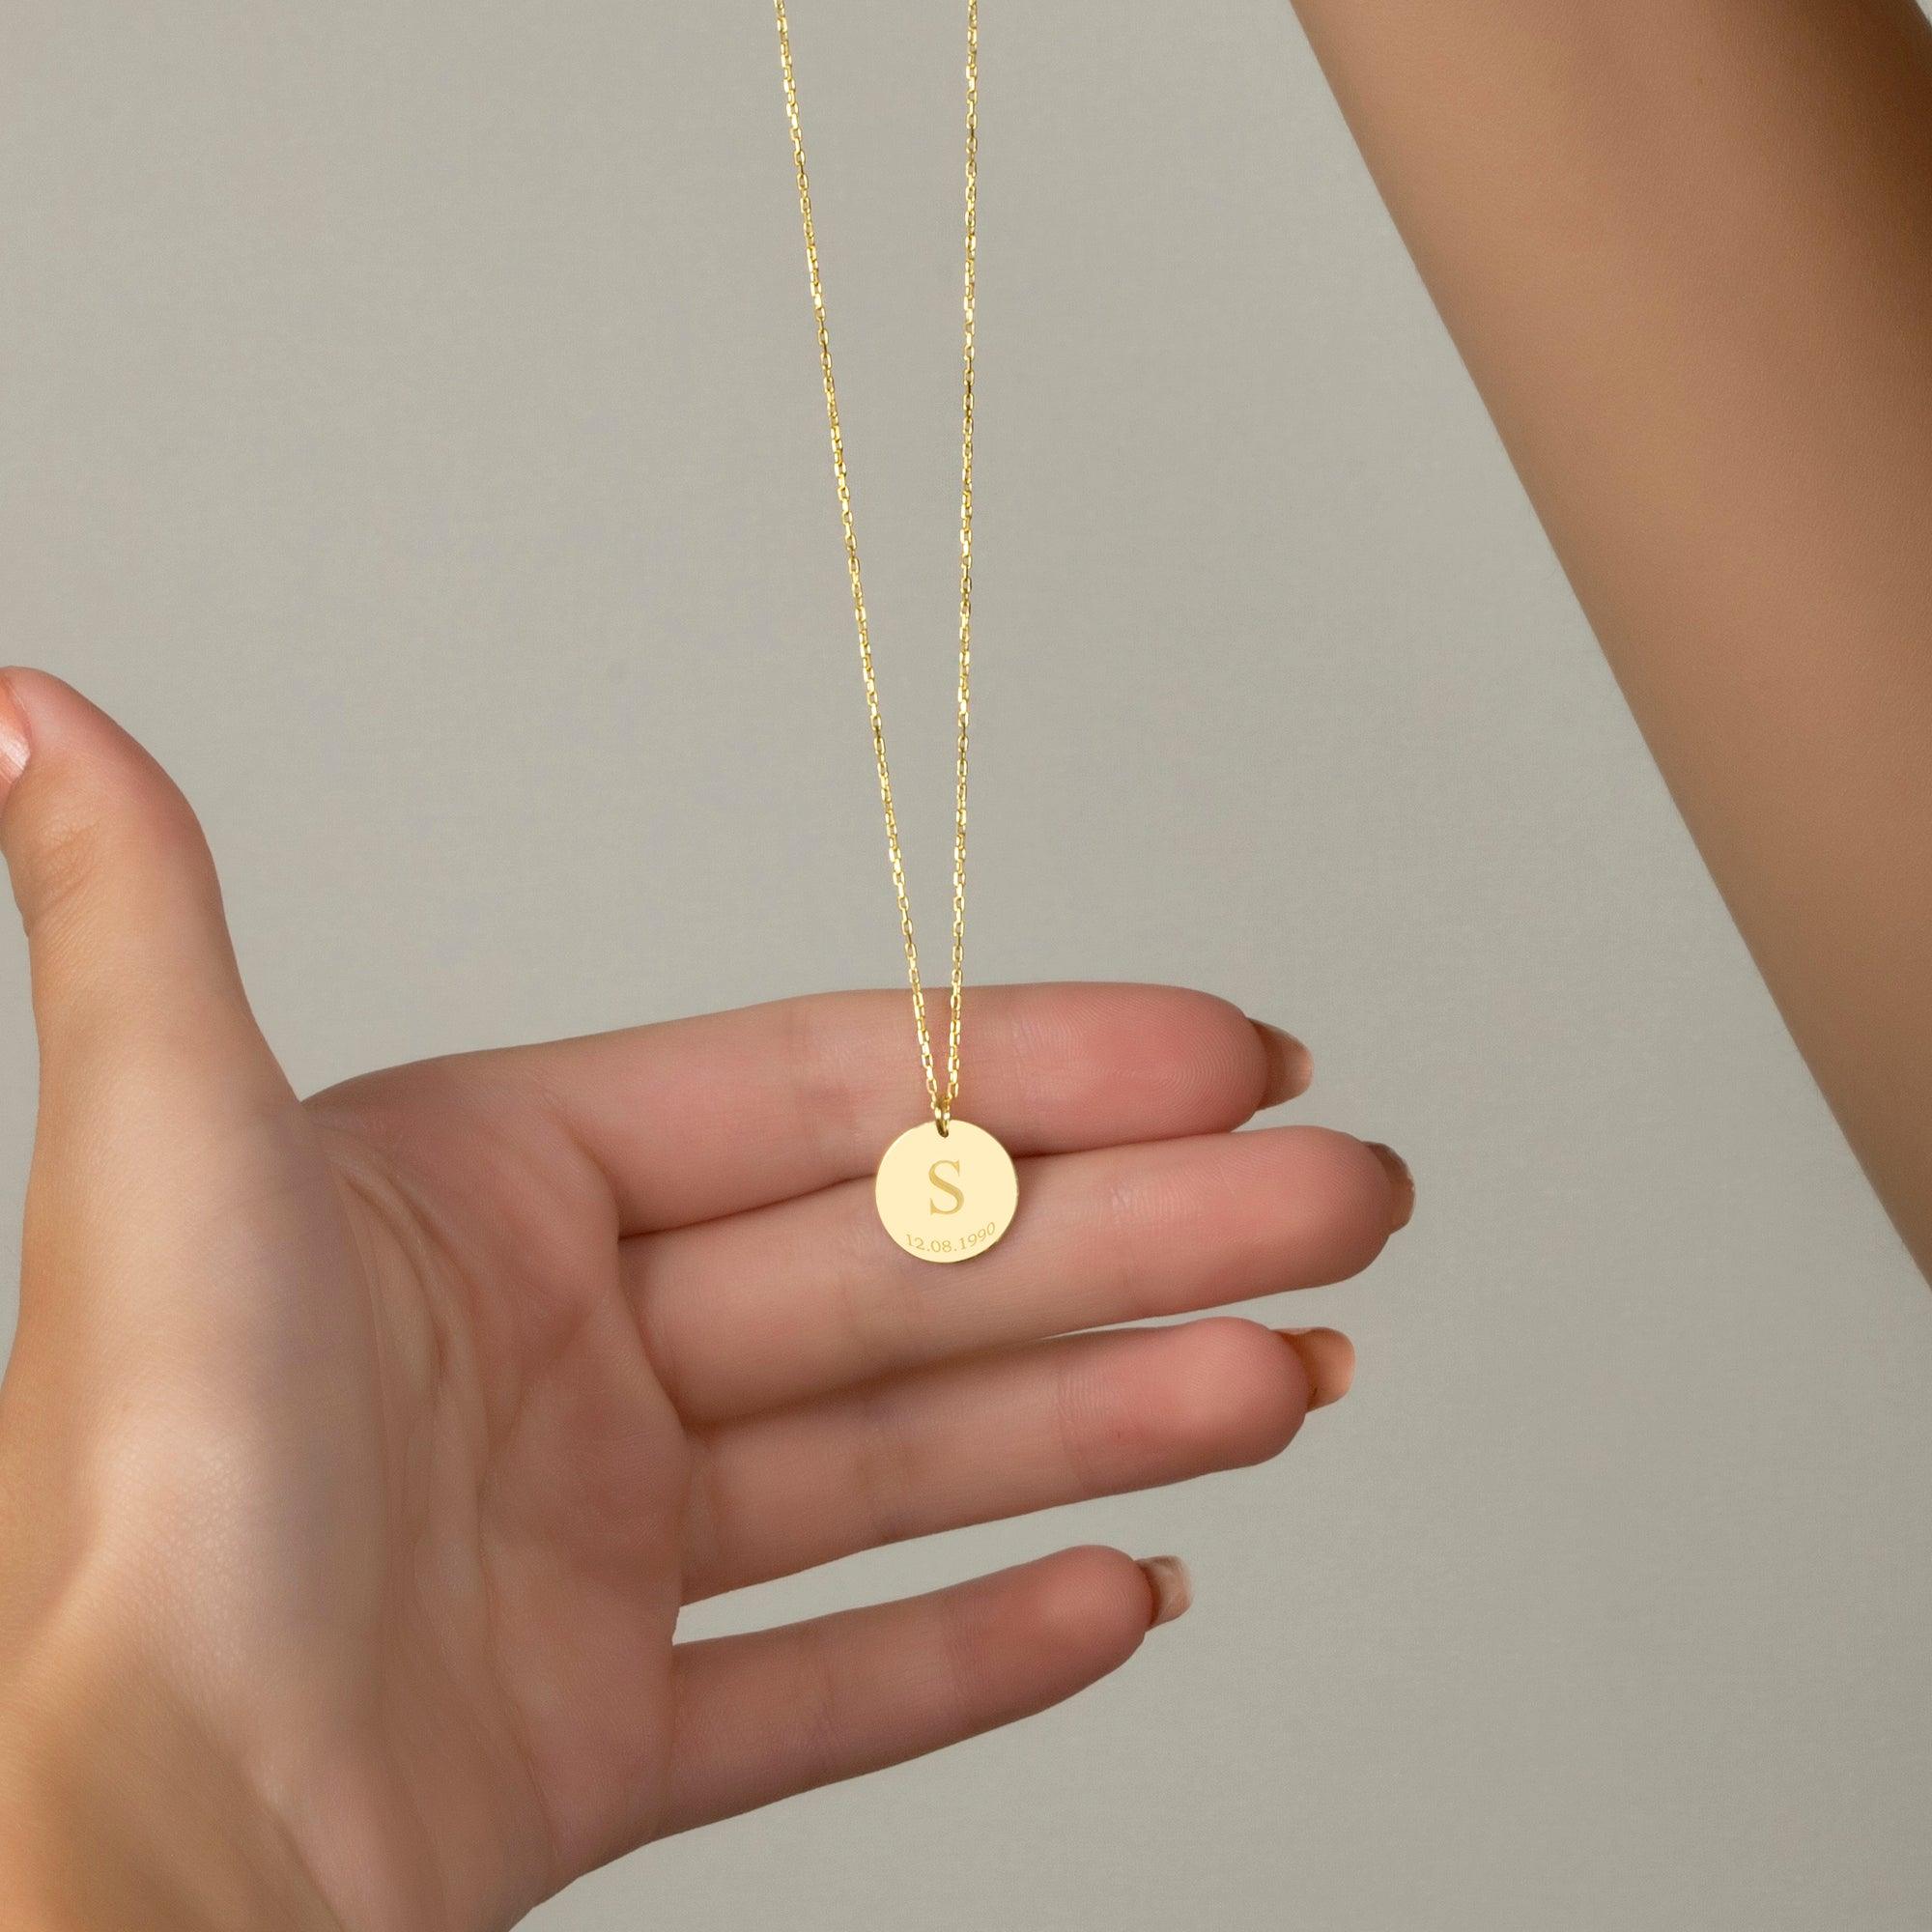 Personalised Initial Necklaces | Bloom Boutique